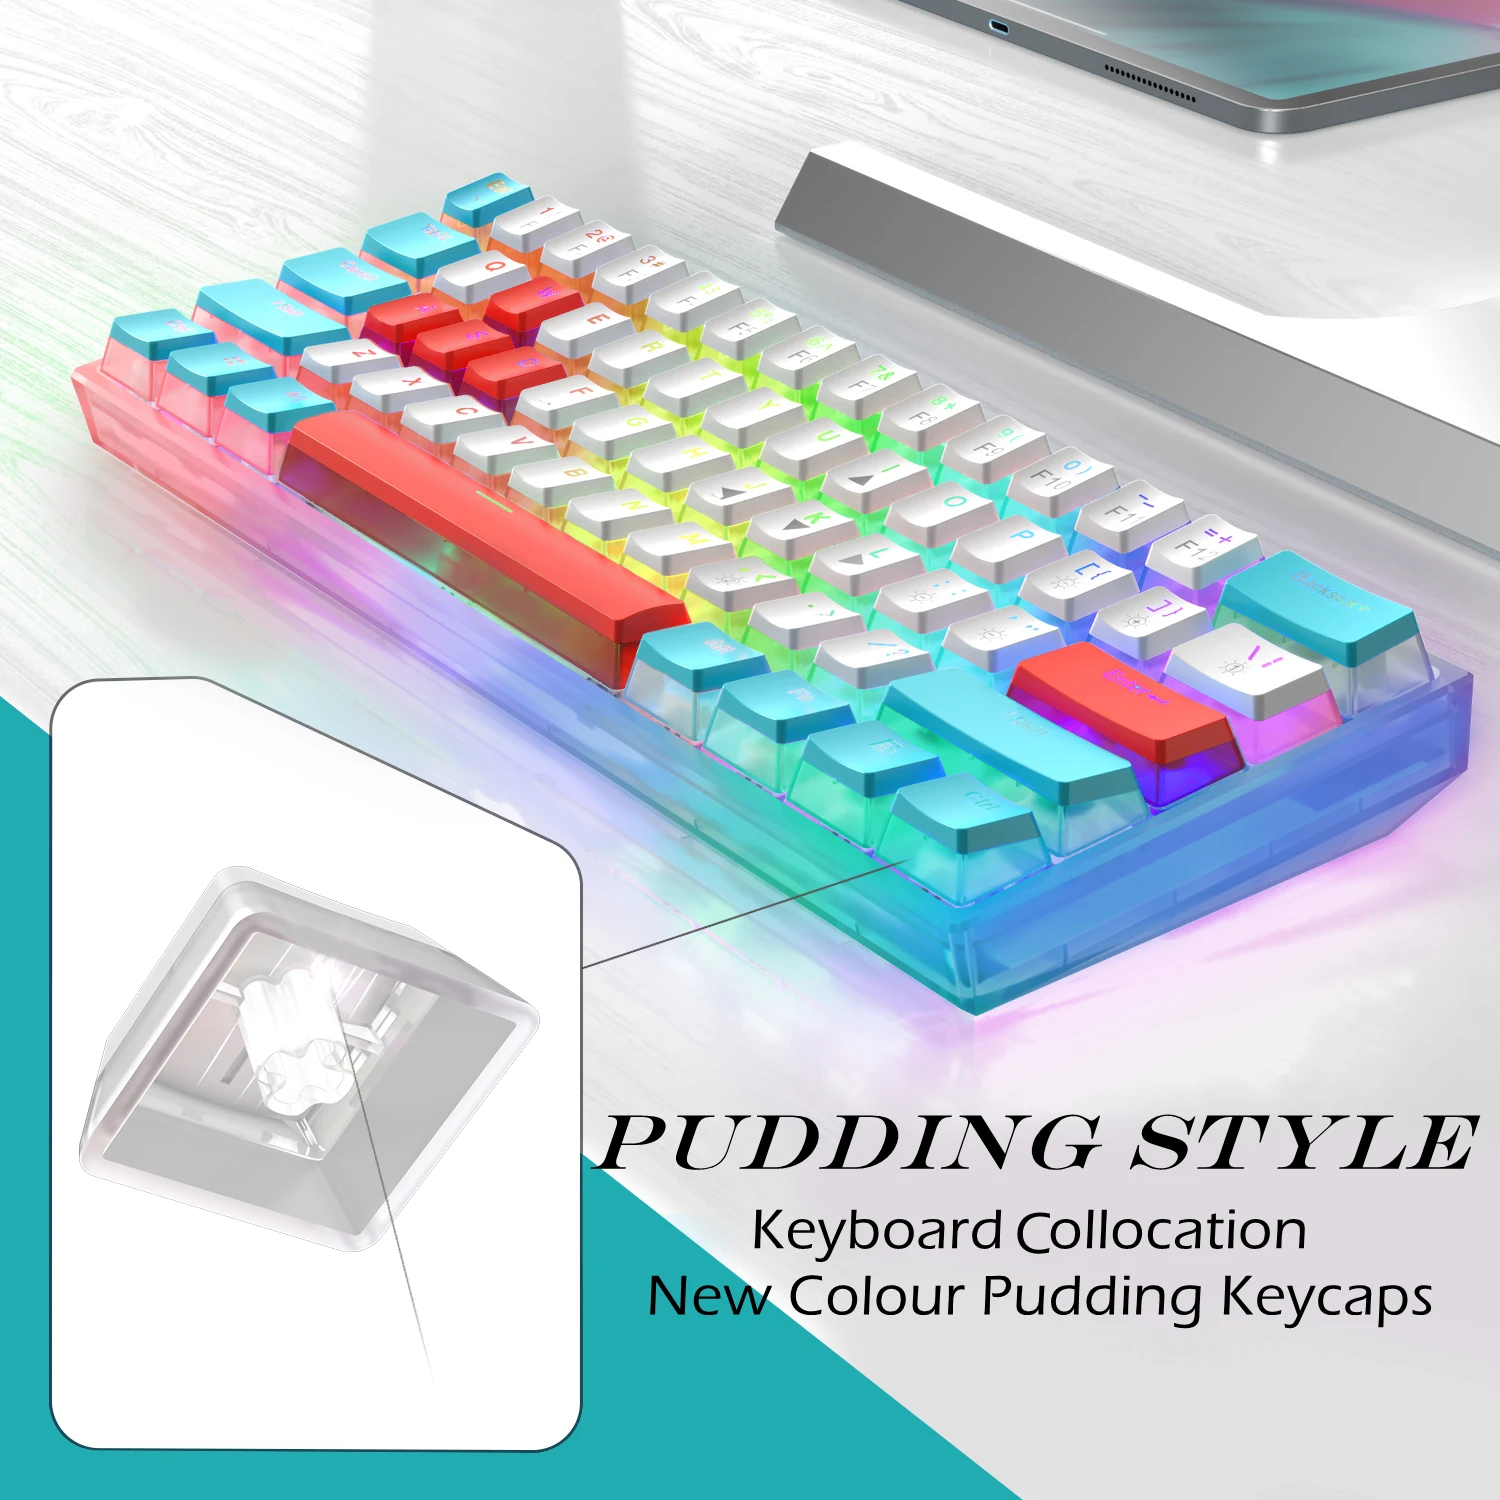 Womier WK61 Gamer Keyboard 60% Layout Hot Swappable Gateron Switch Pudding Keycap Mechanical Keyboard RGB Backlit 61 Keys for PC touch keyboard for pc